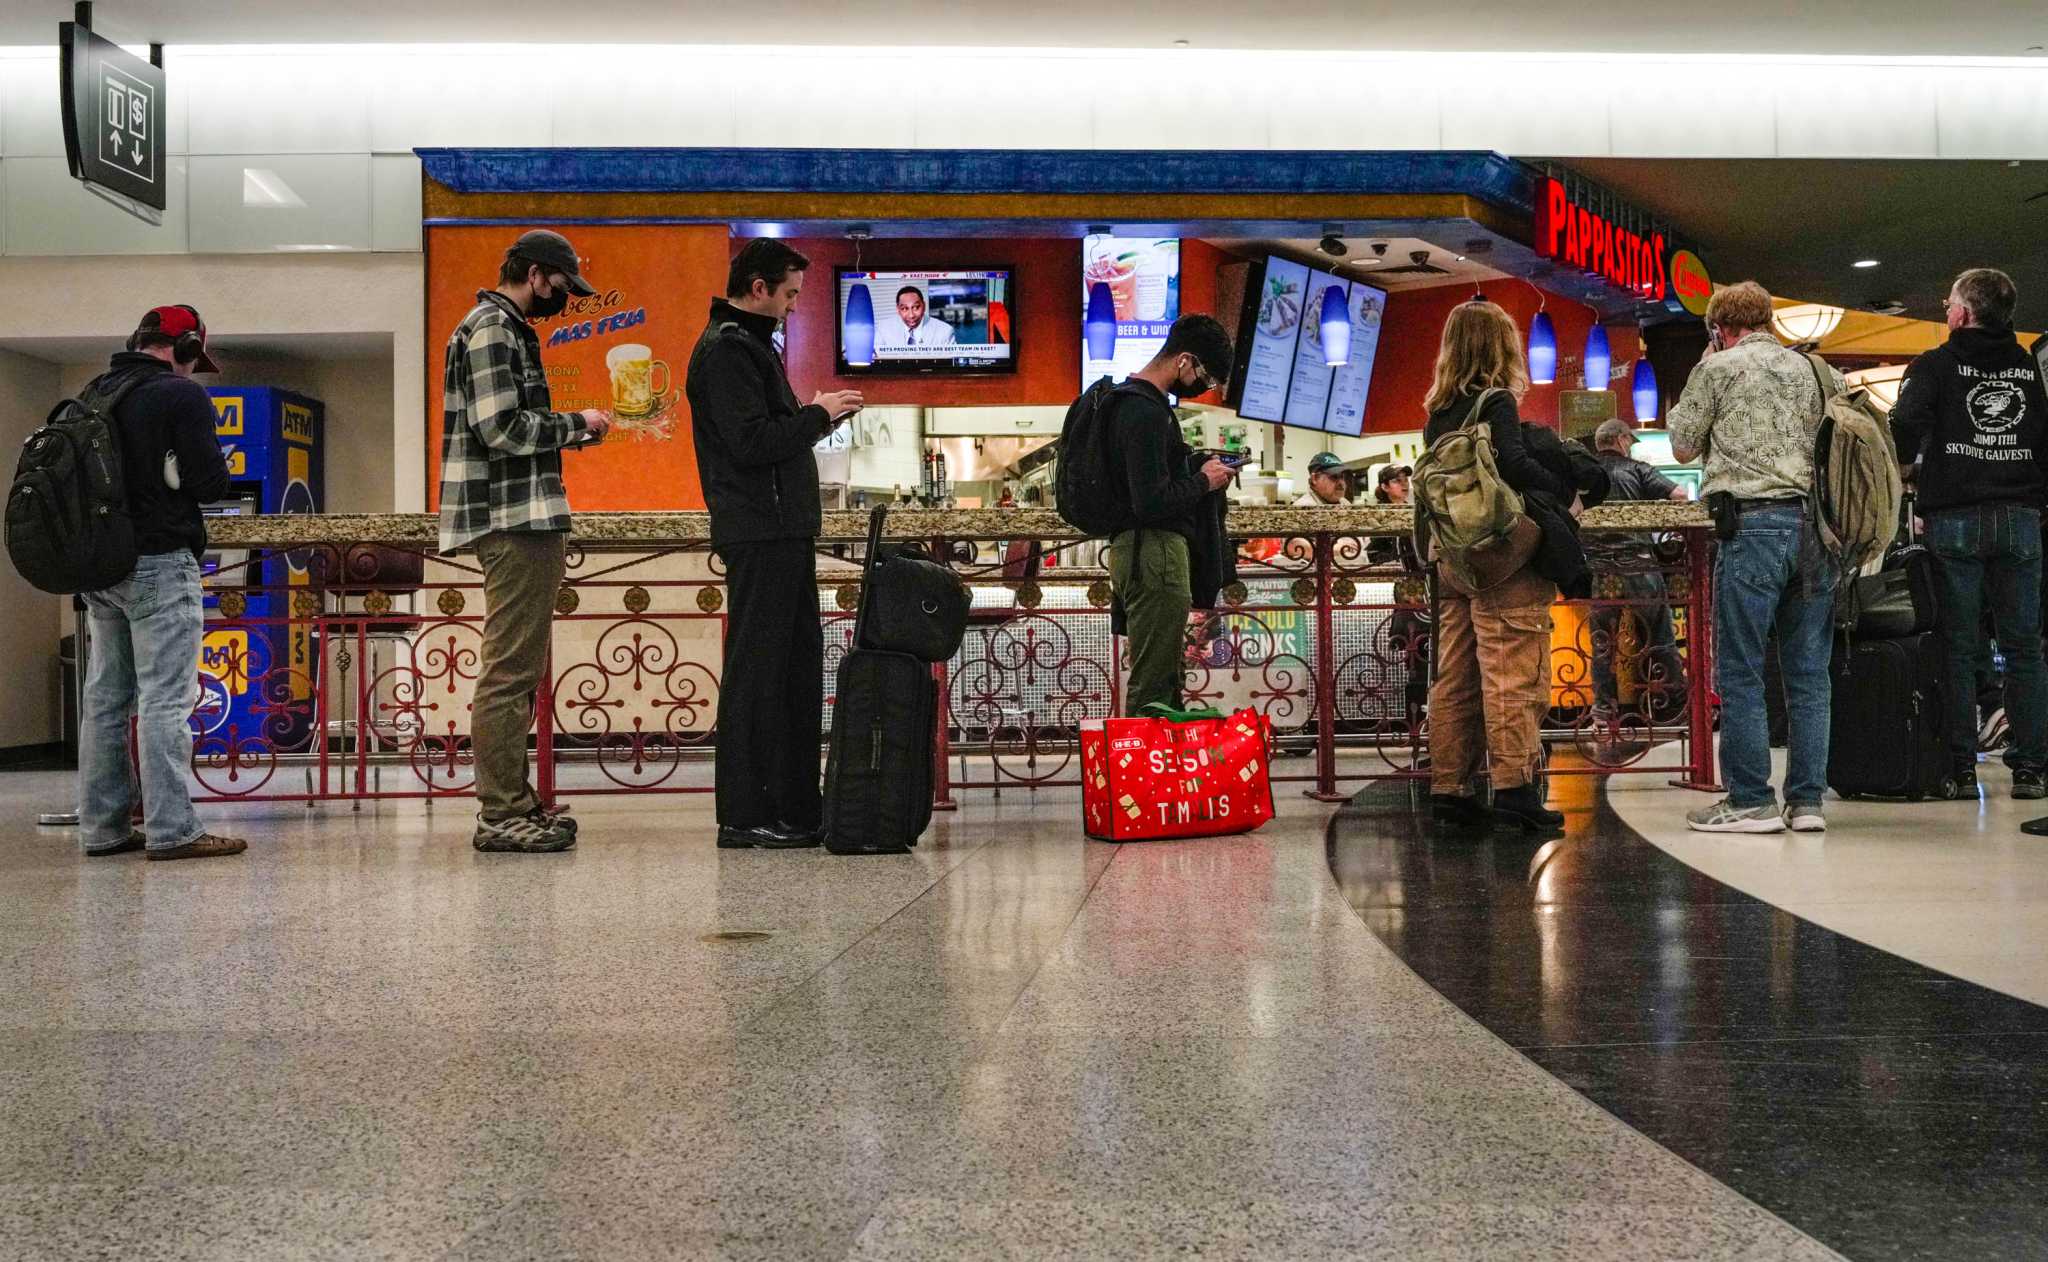 Pappas Restaurants officially out at Hobby Airport after fiery debate